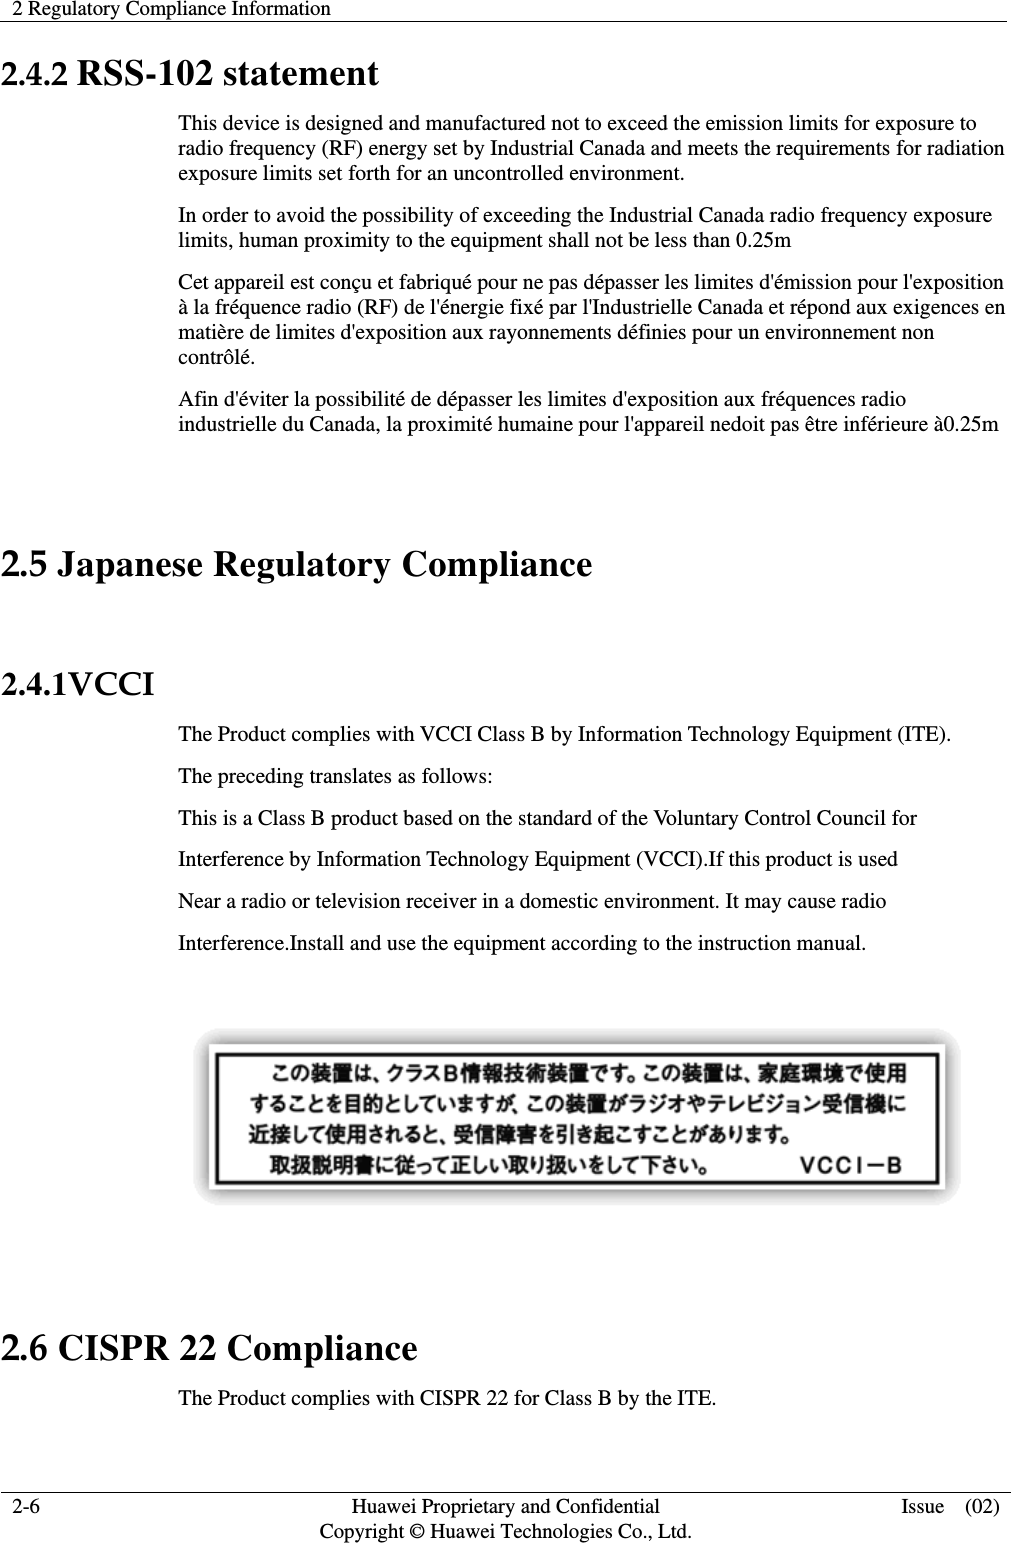 2 Regulatory Compliance Information   2-6  Huawei Proprietary and Confidential         Copyright © Huawei Technologies Co., Ltd. Issue  (02) 2.4.2 RSS-102 statement This device is designed and manufactured not to exceed the emission limits for exposure to radio frequency (RF) energy set by Industrial Canada and meets the requirements for radiation exposure limits set forth for an uncontrolled environment. In order to avoid the possibility of exceeding the Industrial Canada radio frequency exposure limits, human proximity to the equipment shall not be less than 0.25m Cet appareil est conçu et fabriqué pour ne pas dépasser les limites d&apos;émission pour l&apos;exposition à la fréquence radio (RF) de l&apos;énergie fixé par l&apos;Industrielle Canada et répond aux exigences en matière de limites d&apos;exposition aux rayonnements définies pour un environnement non contrôlé.  Afin d&apos;éviter la possibilité de dépasser les limites d&apos;exposition aux fréquences radio industrielle du Canada, la proximité humaine pour l&apos;appareil nedoit pas être inférieure à0.25m  2.5 Japanese Regulatory Compliance  2.4.1VCCI The Product complies with VCCI Class B by Information Technology Equipment (ITE). The preceding translates as follows: This is a Class B product based on the standard of the Voluntary Control Council for Interference by Information Technology Equipment (VCCI).If this product is used Near a radio or television receiver in a domestic environment. It may cause radio Interference.Install and use the equipment according to the instruction manual.    2.6 CISPR 22 Compliance The Product complies with CISPR 22 for Class B by the ITE. 